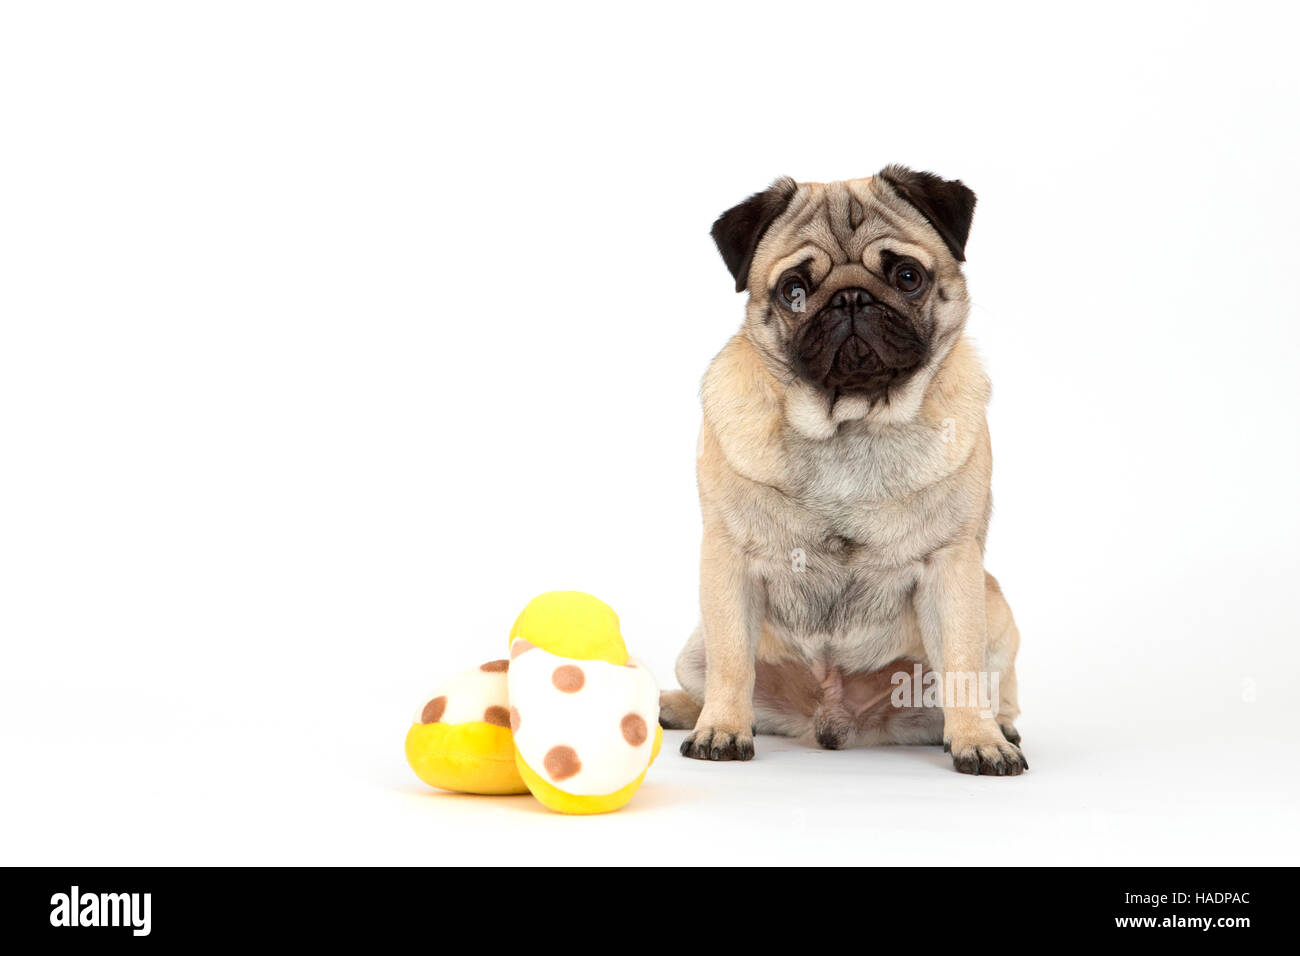 Pug. Adult male sitting next to slippers. Studio picture against whte background. Sale in German-speaking countries only Photo - Alamy